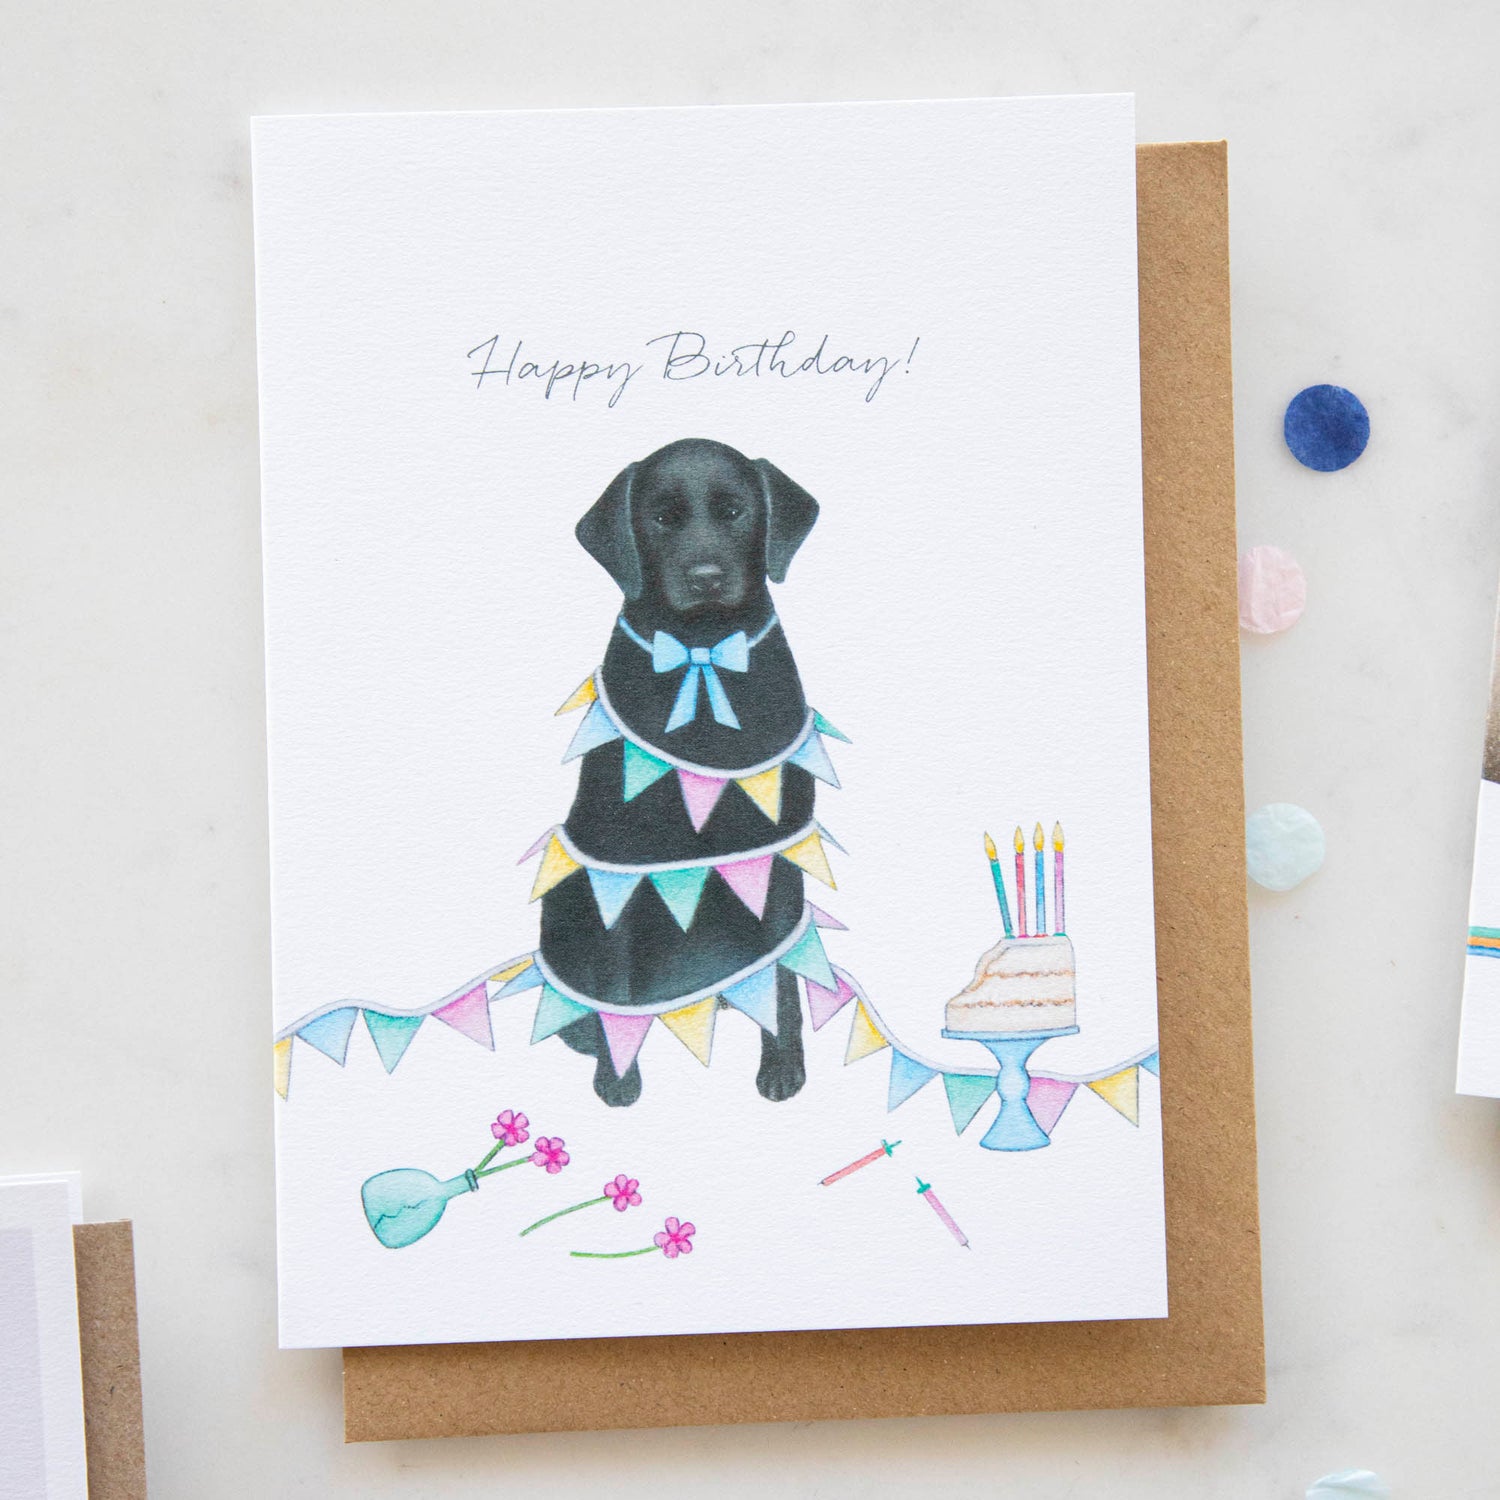 A black Labrador and Bunting birthday card with a birthday cake by Lottie Murphy.